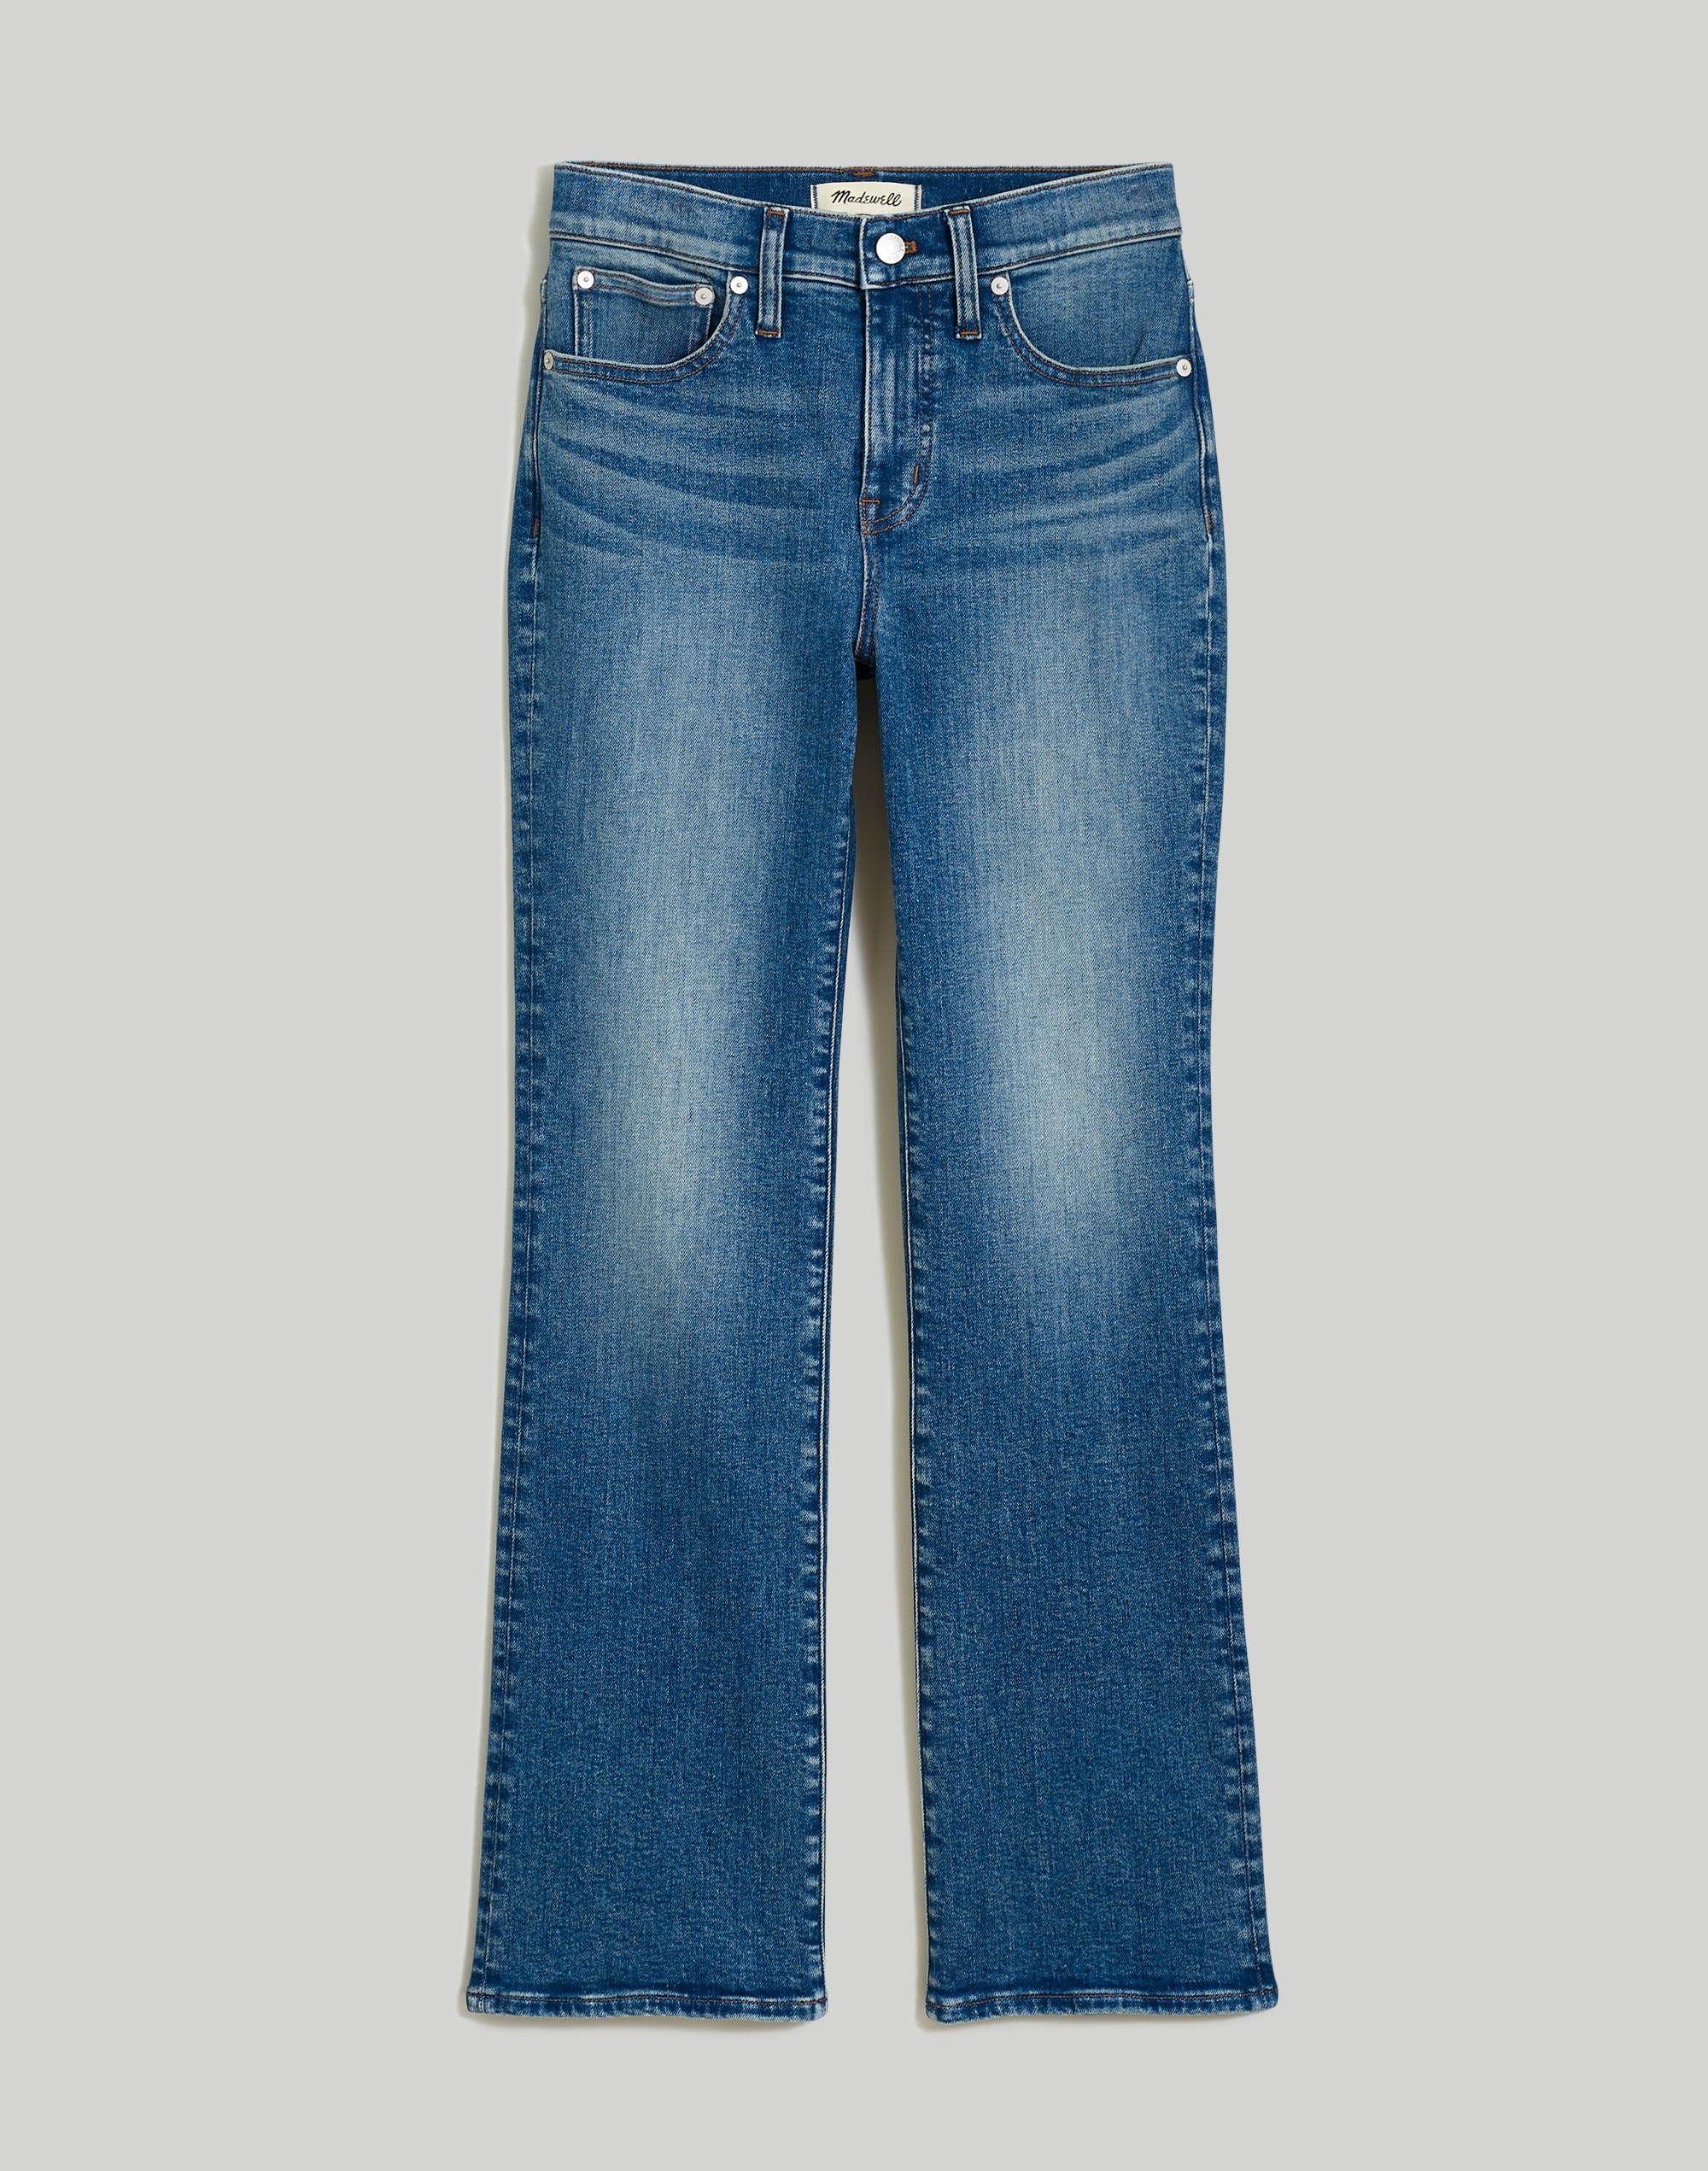 Kick Out Crop Jeans Oneida Wash